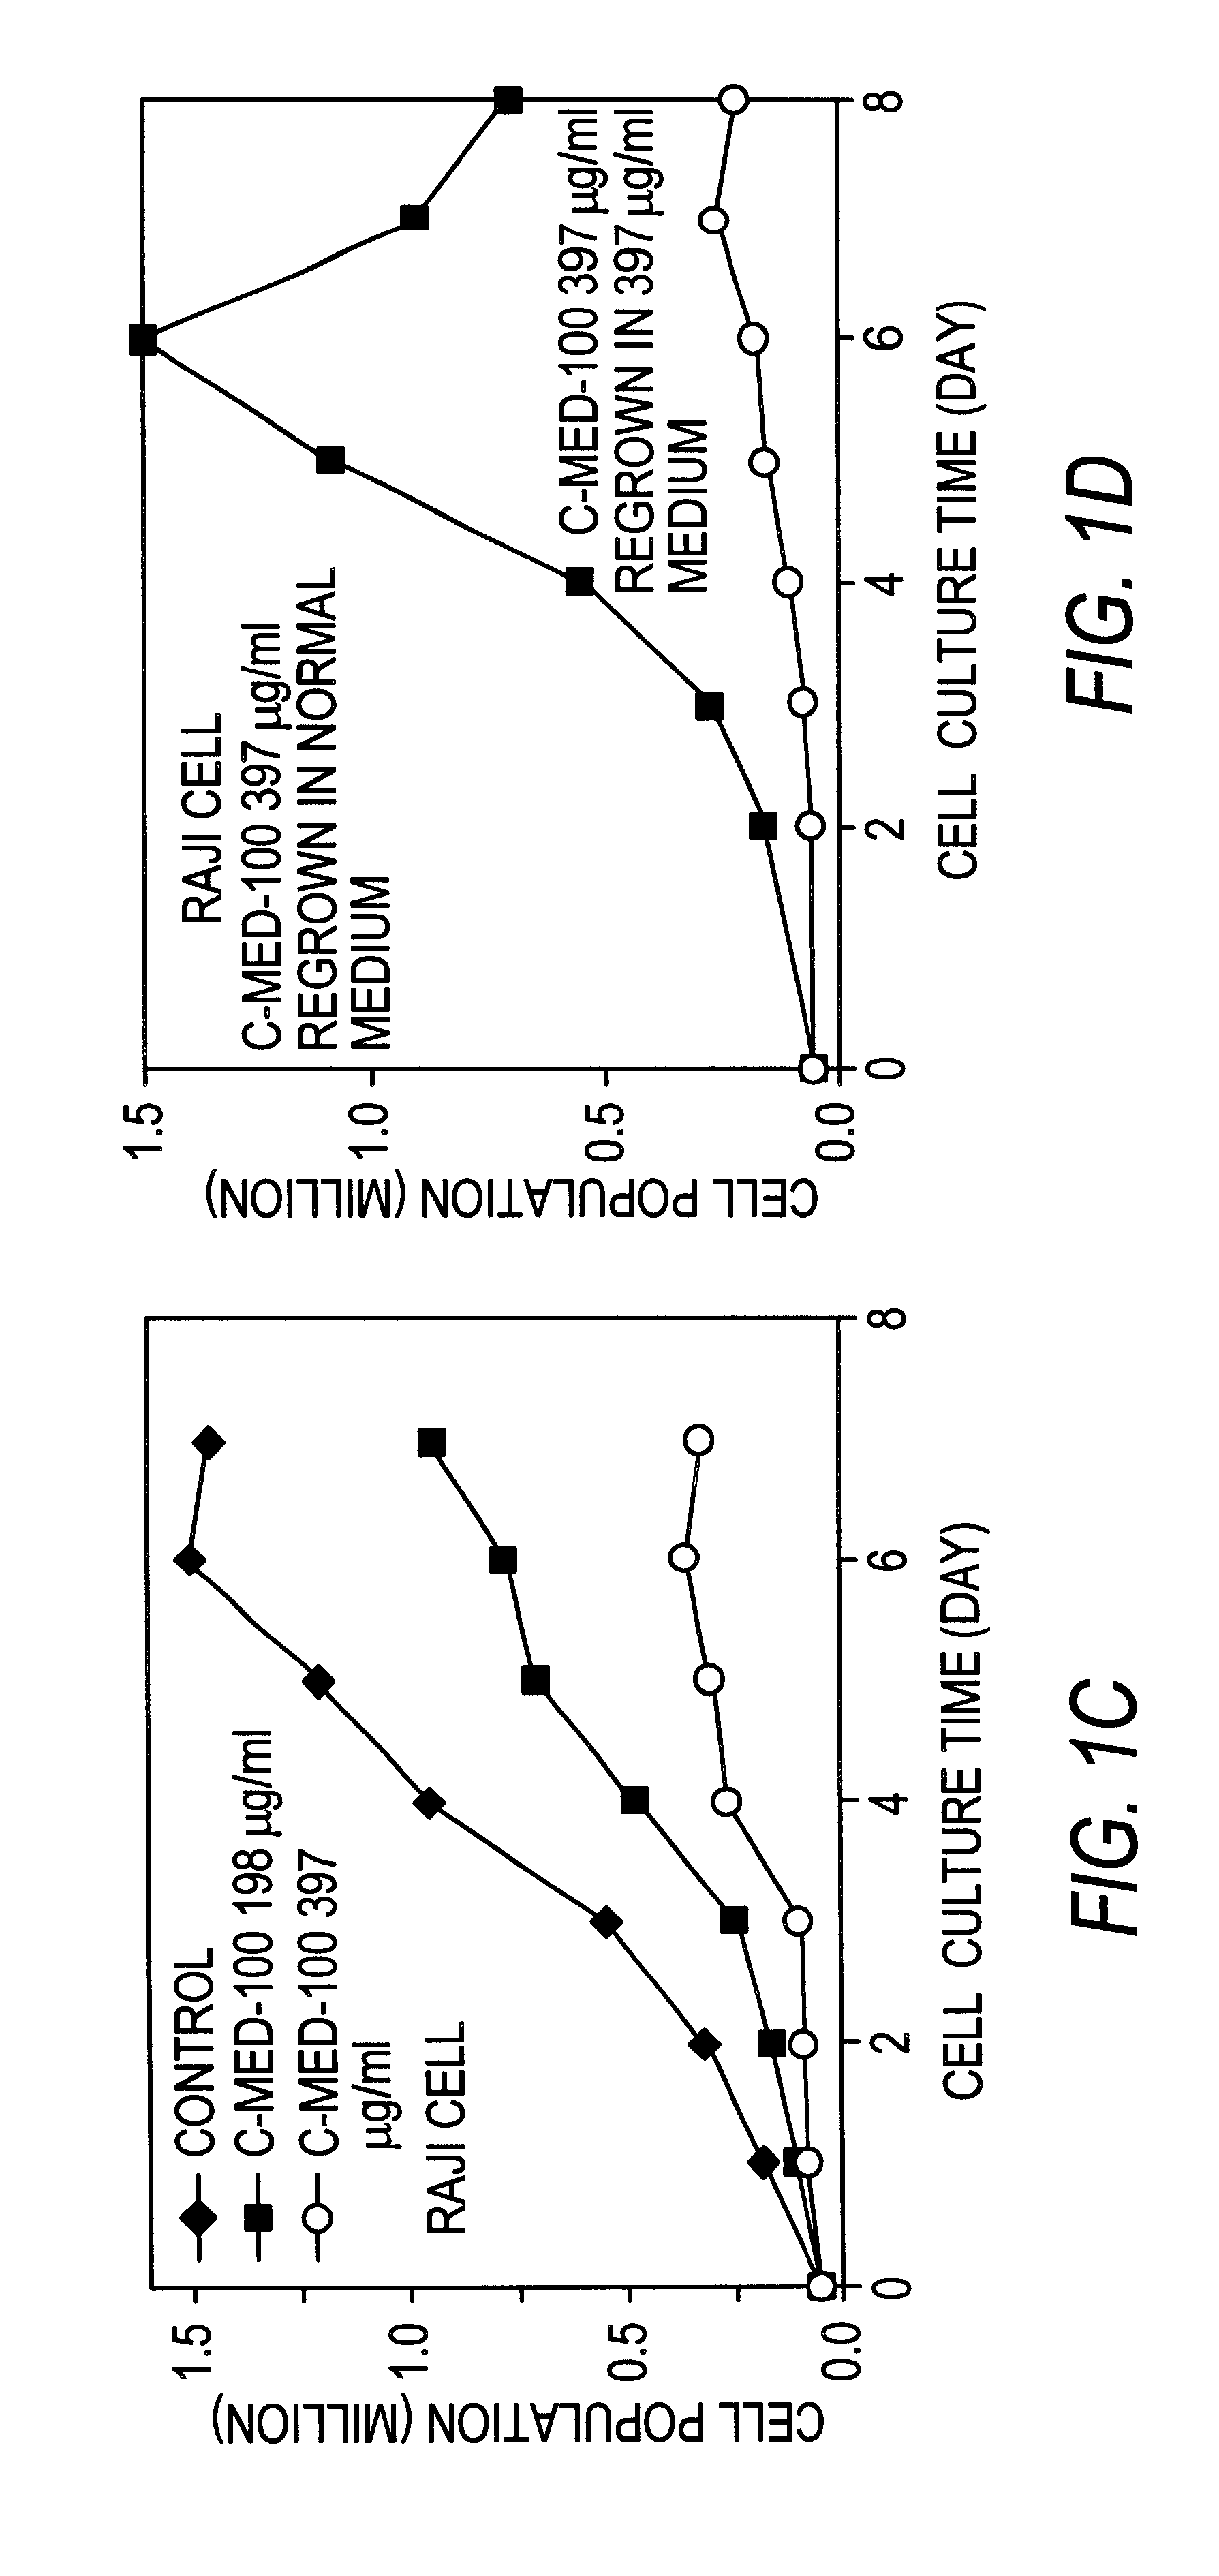 Method of preparation and composition of a water soluble extract of the plant species Uncaria for enhancing immune, anti-inflammatory and anti-tumor processes of warm blooded animals